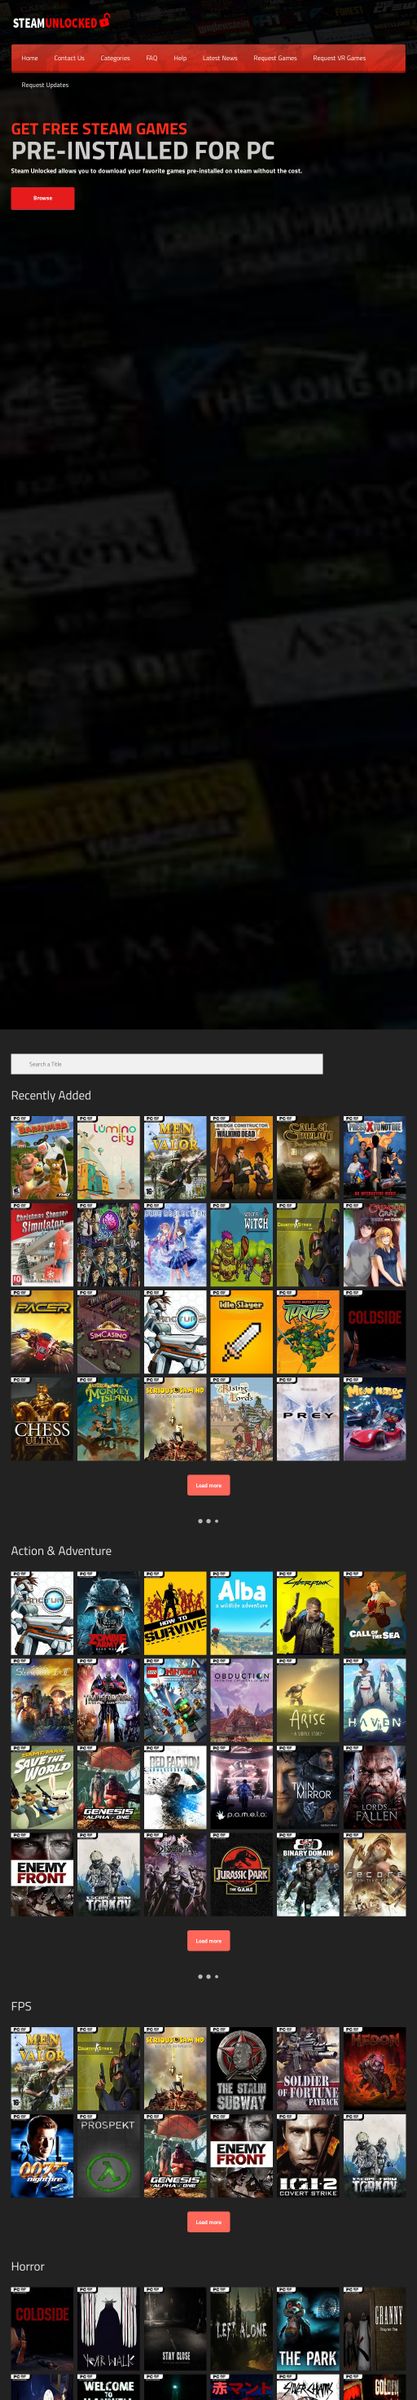 STEAMUNLOCKED Android App - Download STEAMUNLOCKED for free